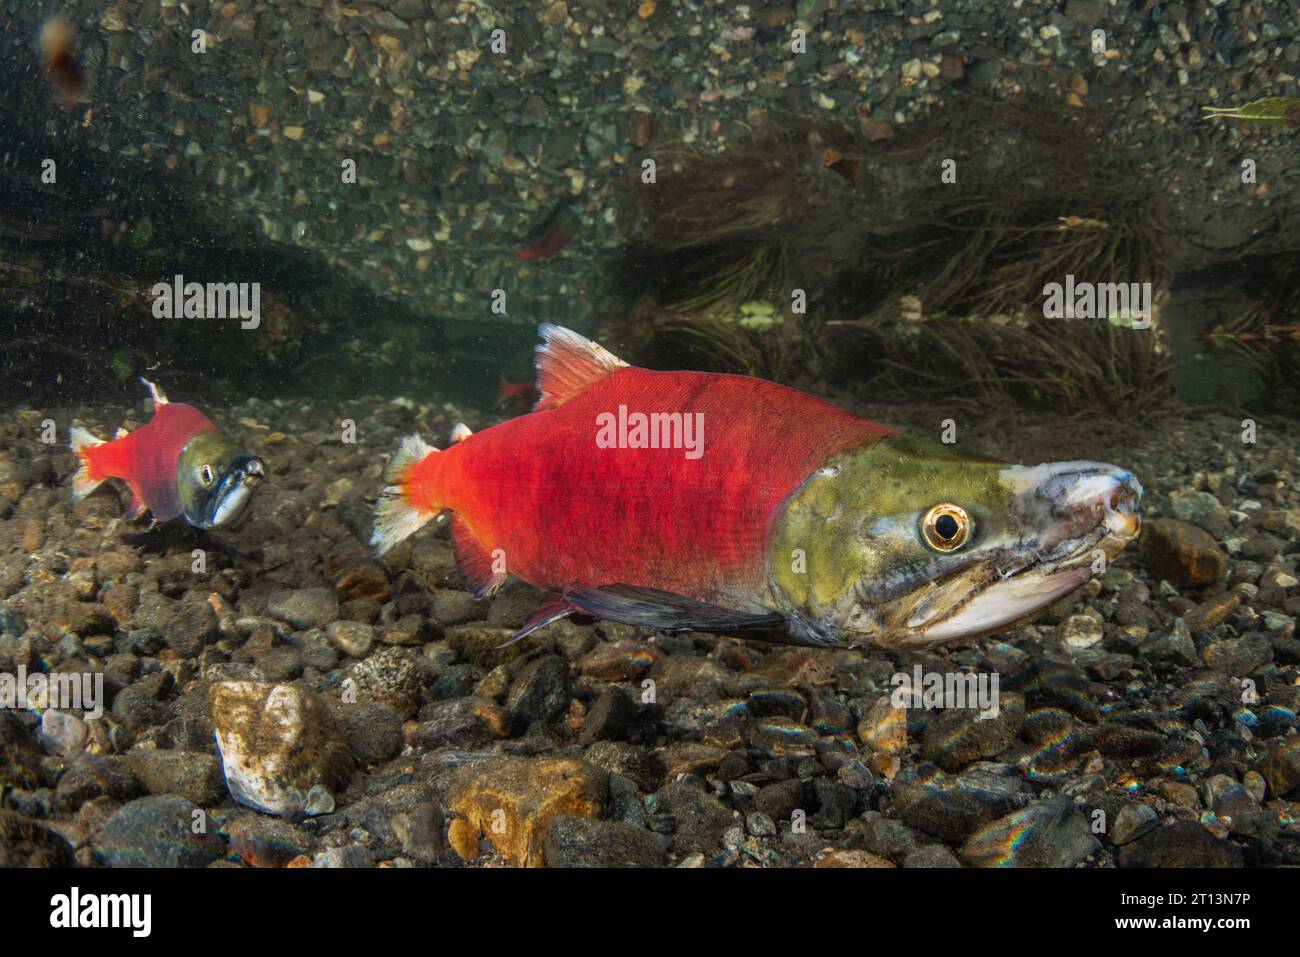 Kokanee salmon (Oncorhynchus nerka) in their colorful red spawning stage as they congregate and migrate for spawning. Stock Photo